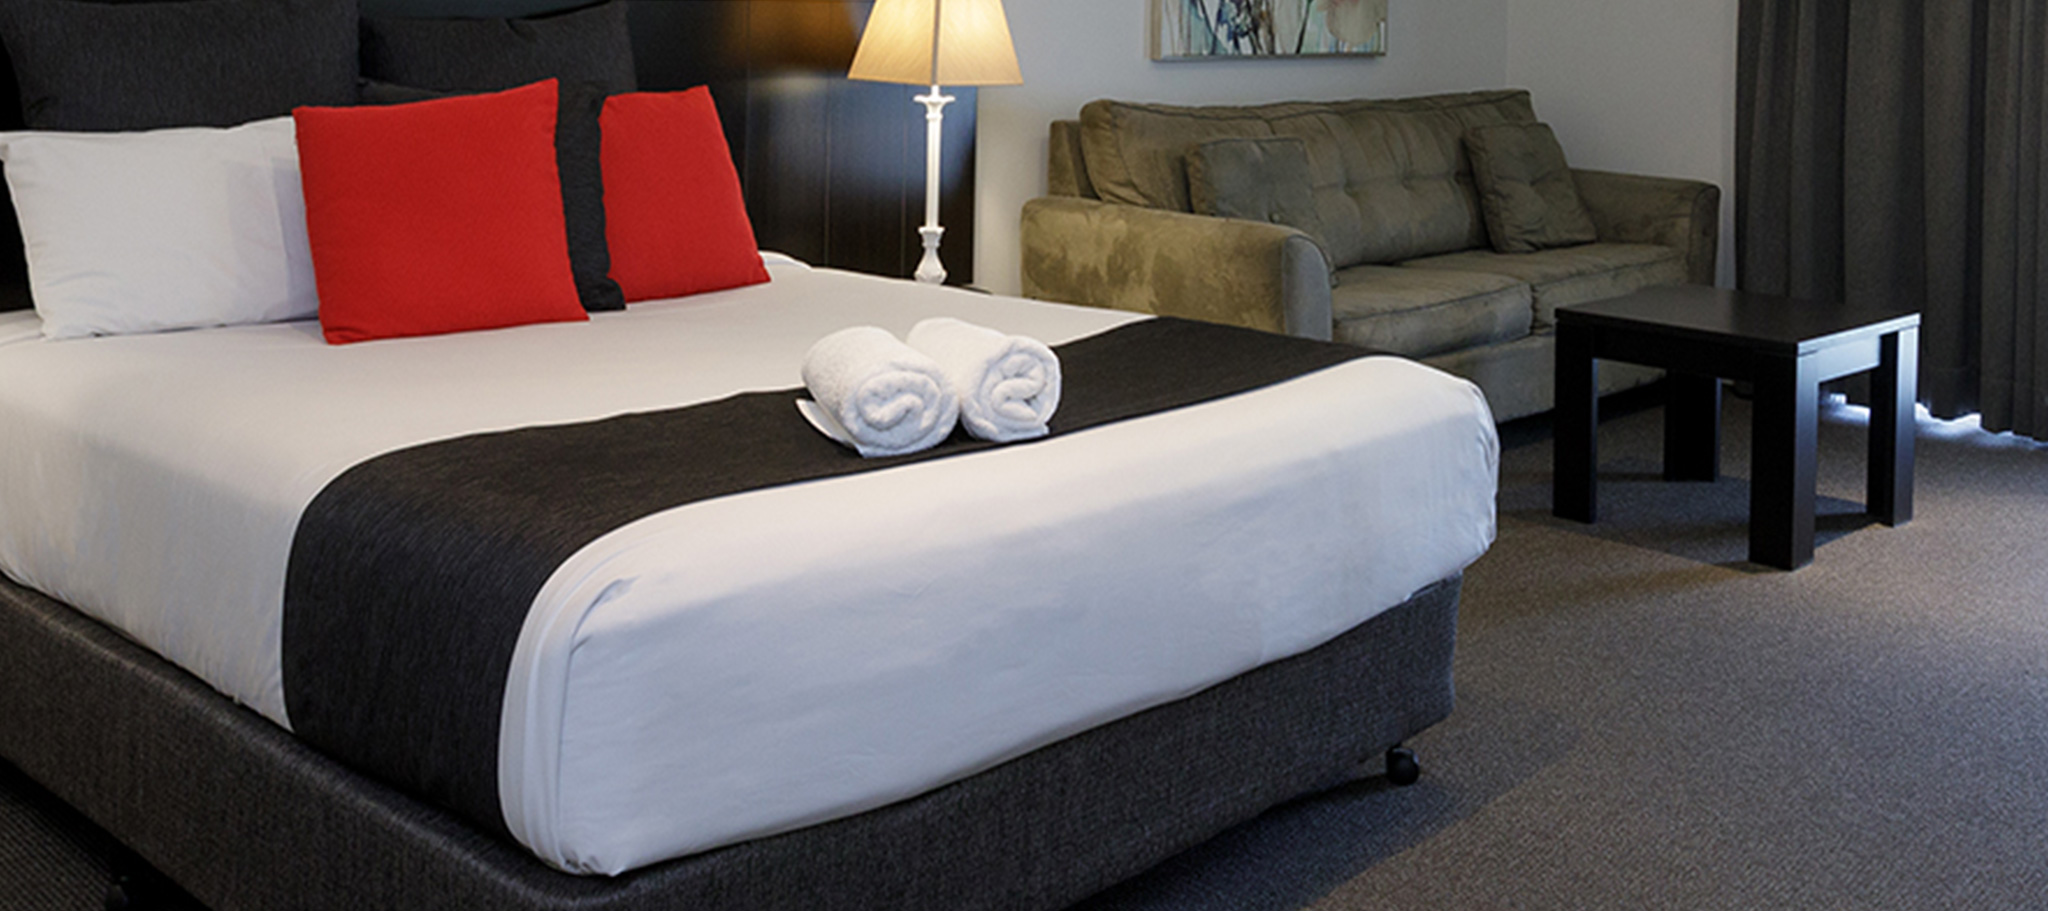 A queen size bed with beautiful white linen covers and red scatter cushions. Two rolled up white towel are displayed on the edge of the bed. There is a couch and table in the room and the night stand is on, making it very homely and inviting.